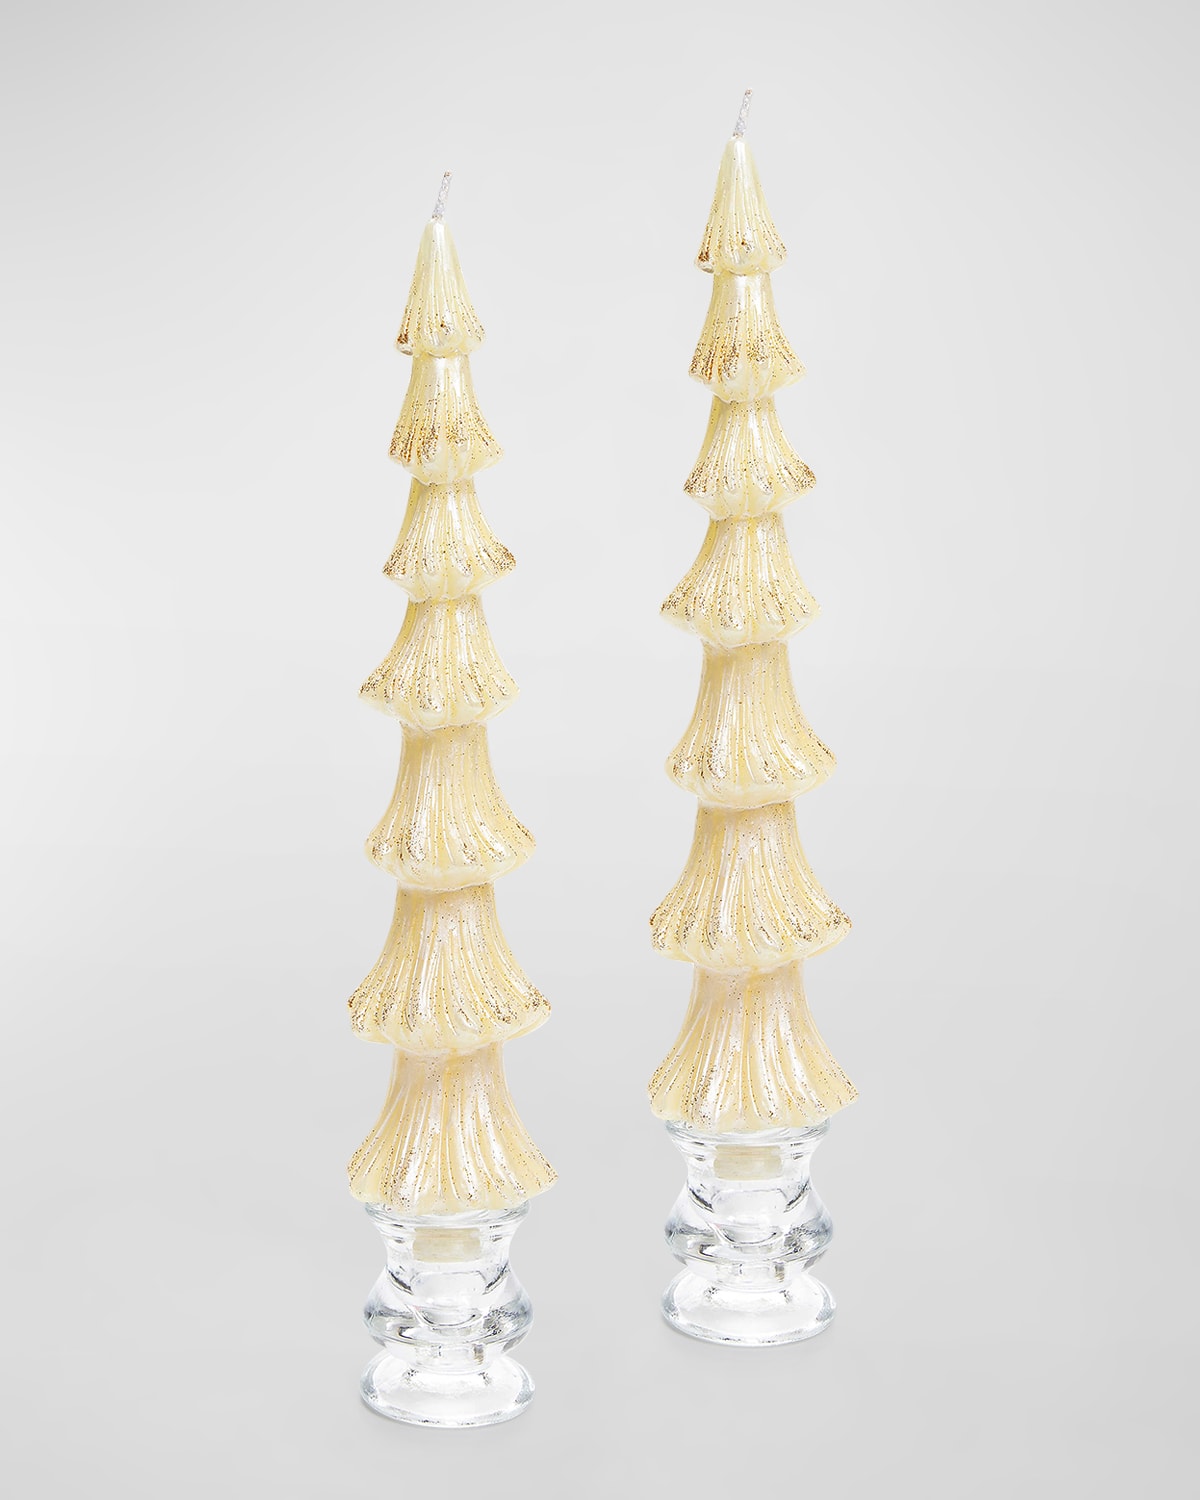 Mackenzie-childs Tree Dinner Ivory Candles, Set Of 2 In Gold